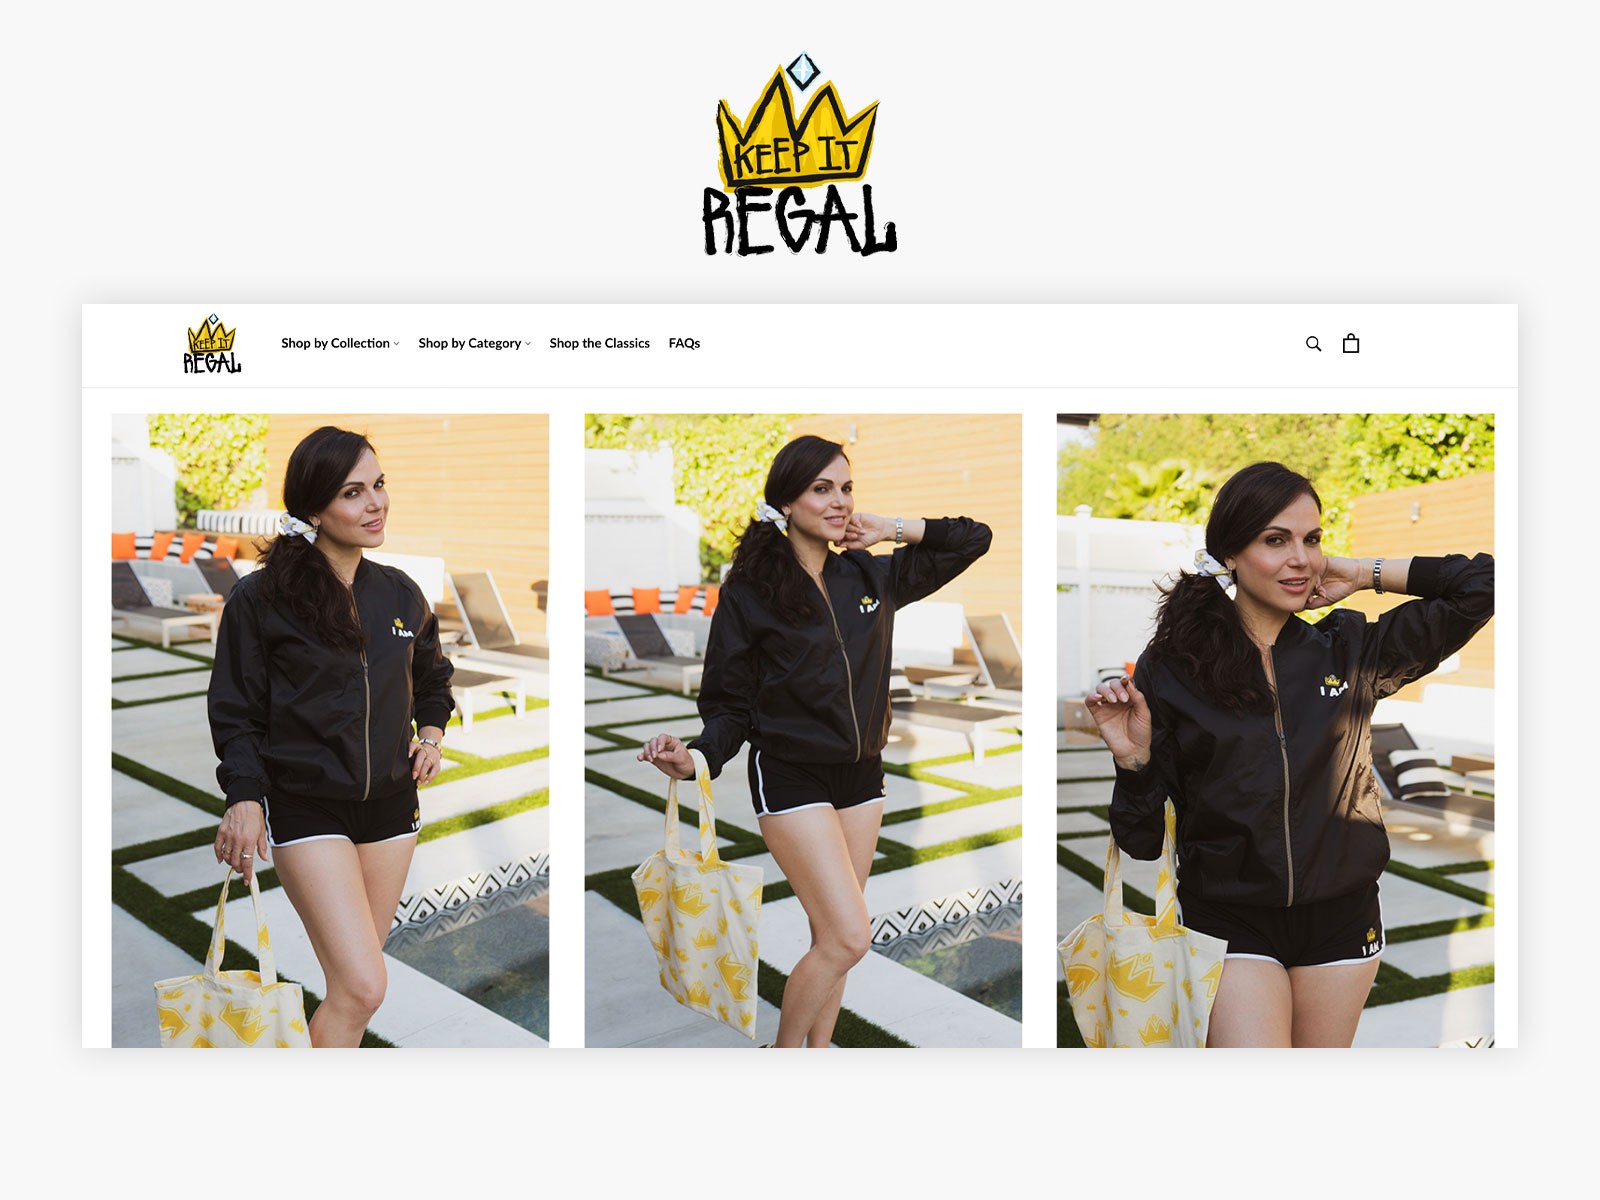 Keep it Regal is a clothing brand created by American actress and producer Lana Parrilla. 